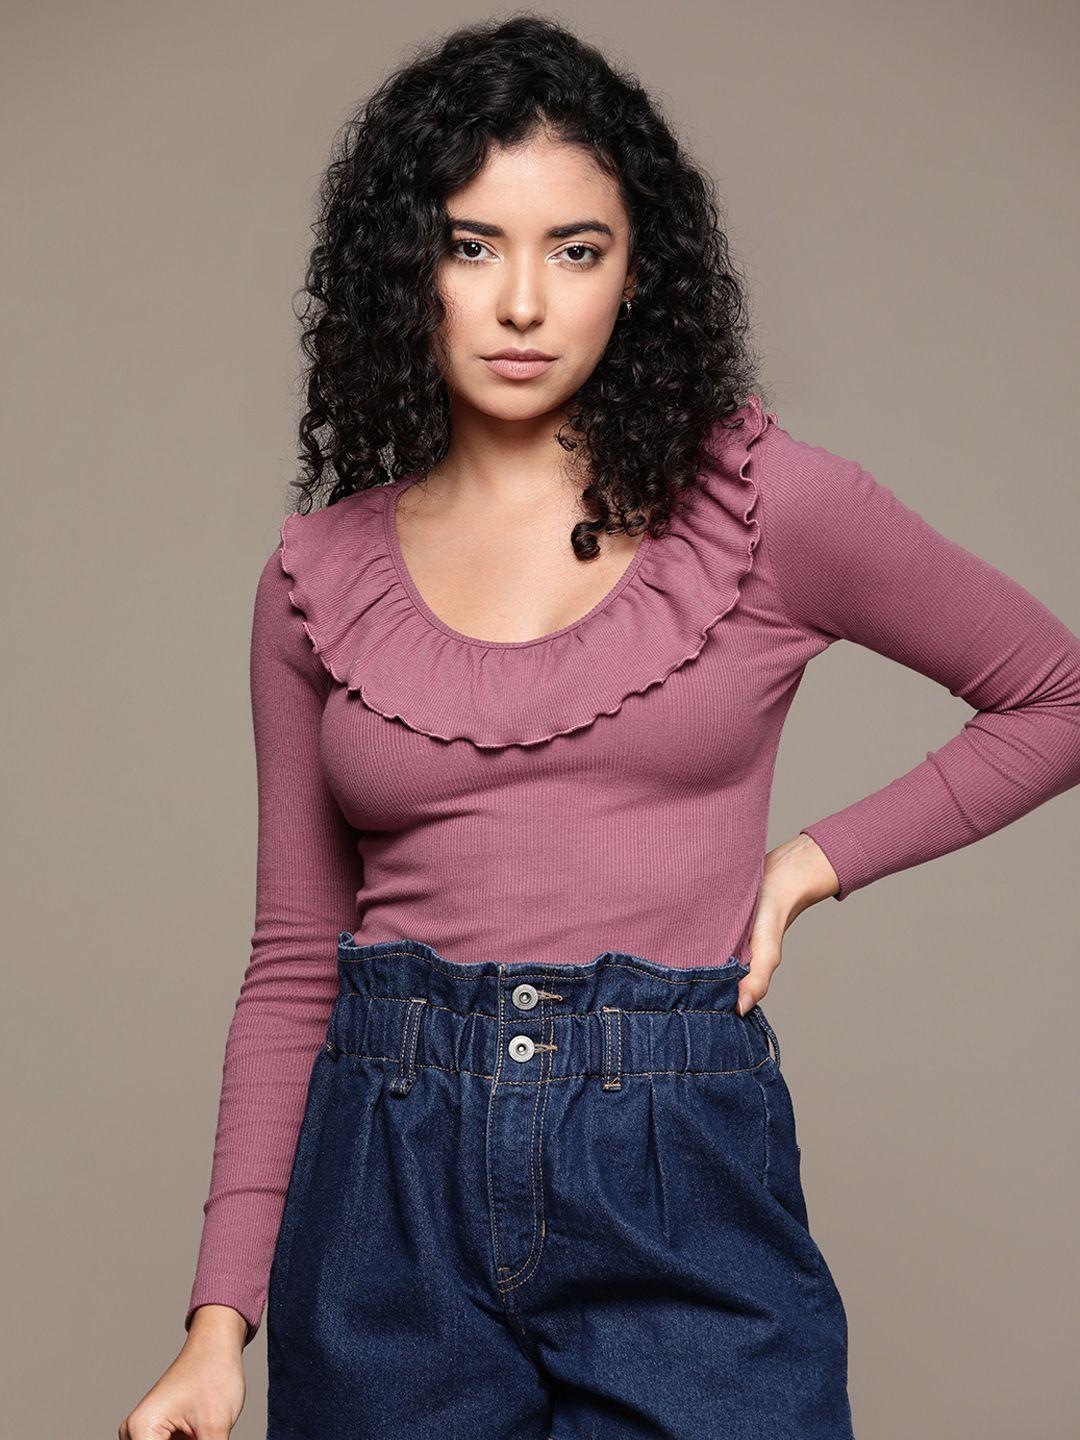 the roadster lifestyle co. knitted slim scoop neck ruffled top